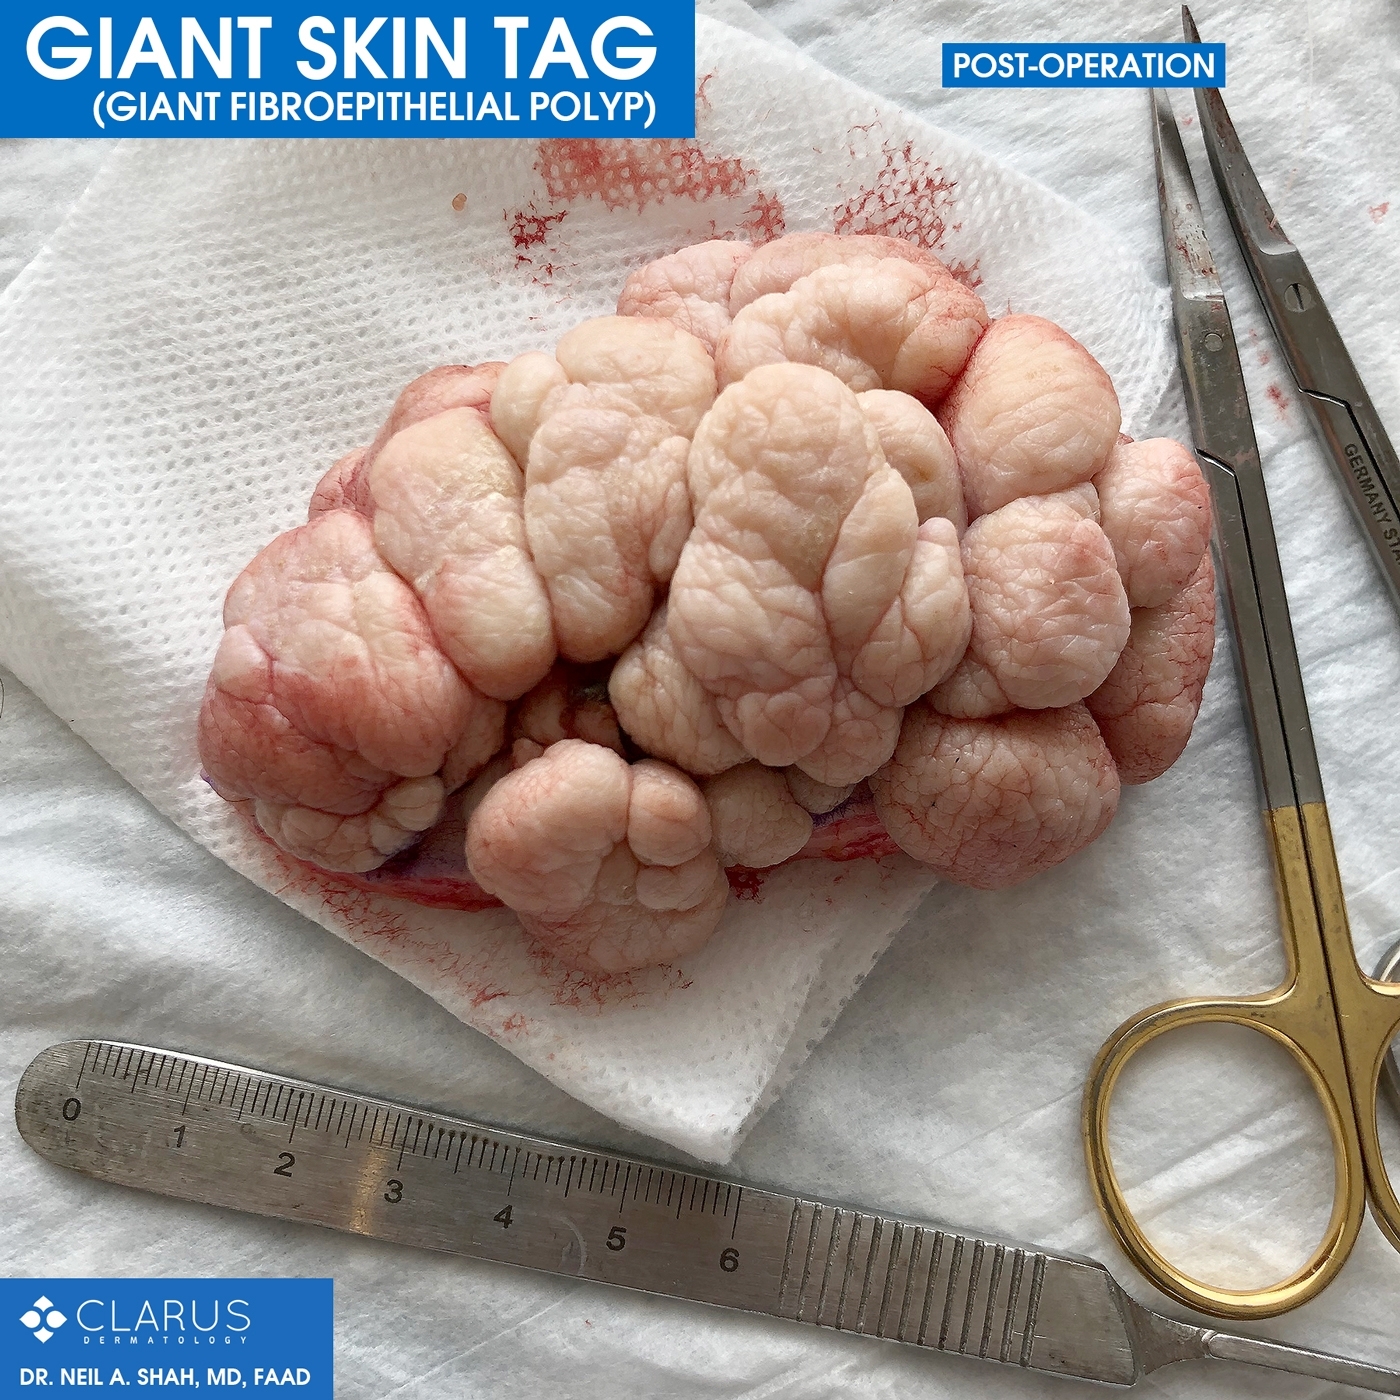 The images are from a patient that board-certified dermatologist Dr. Neil Shah recently saw here at Clarus Dermatology. The large, harmless tumor was determined to most likely be a giant skin tag, known formally as a giant fibroepithelial polyp.